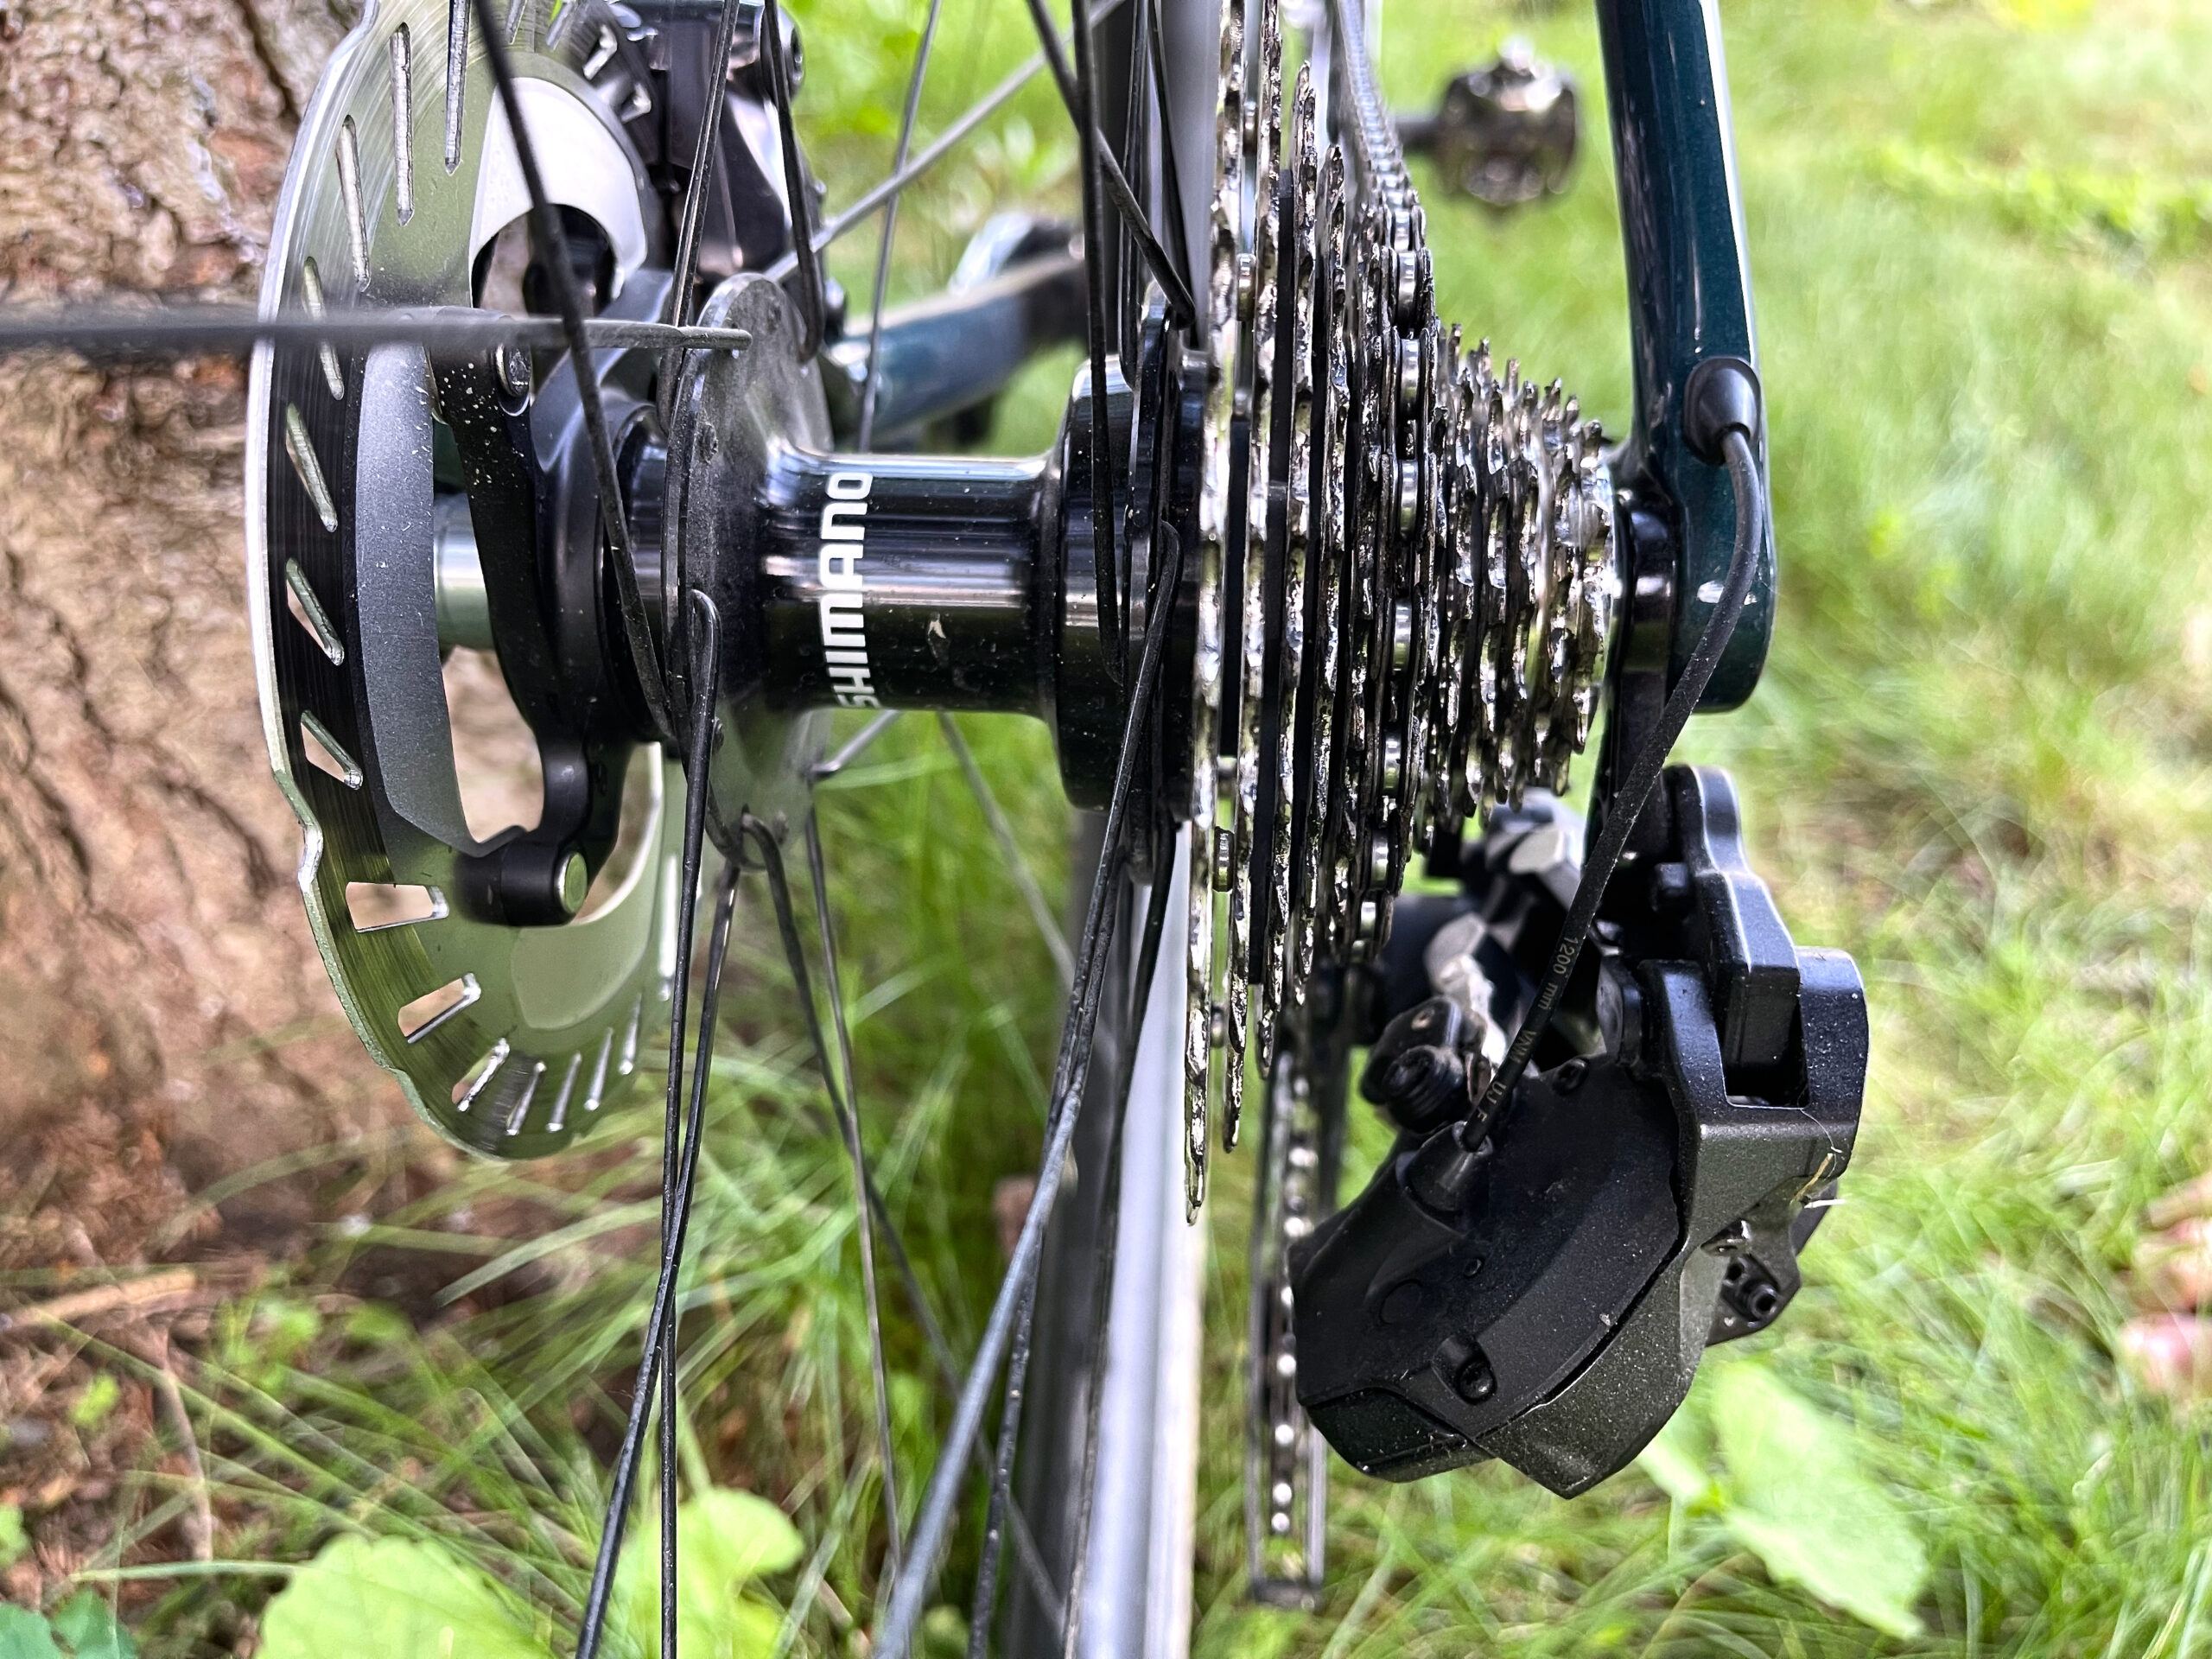 Shimano GRX Di2 12-speed Review back cassette